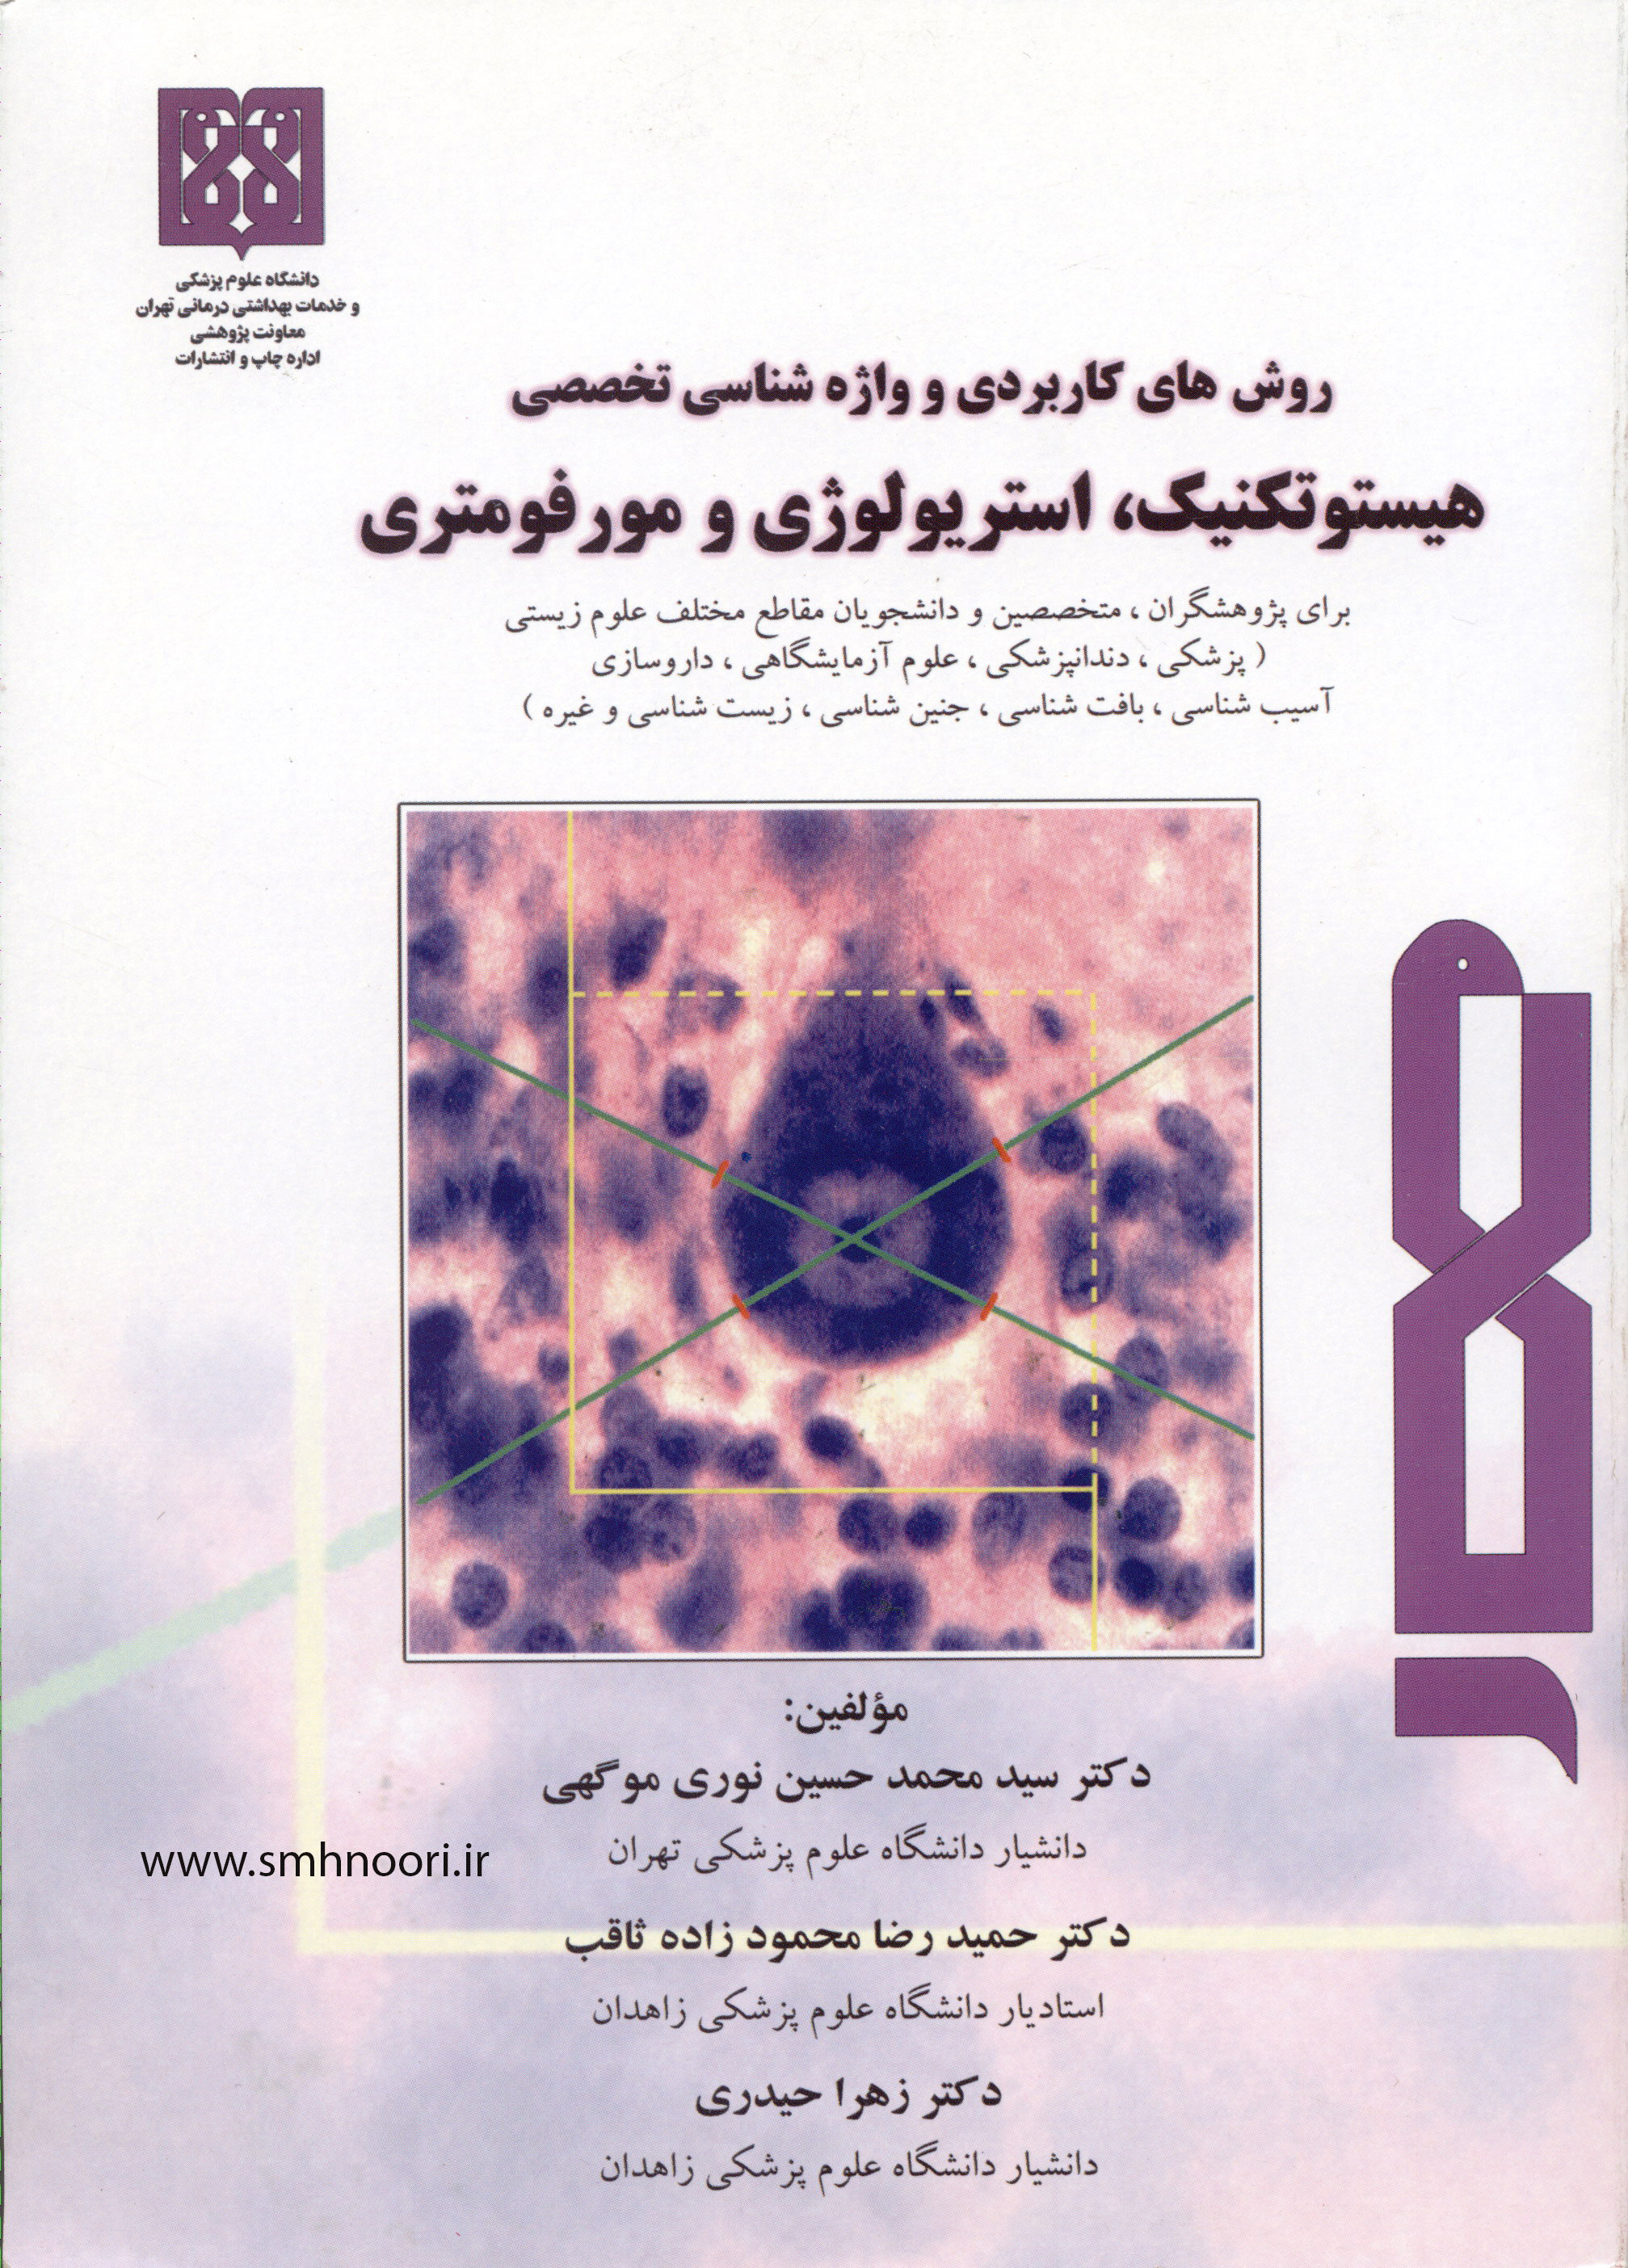 register-with-histological-techniques-methods-and-terminology-expertise-stereo-happylogy-and-morphometry-seal